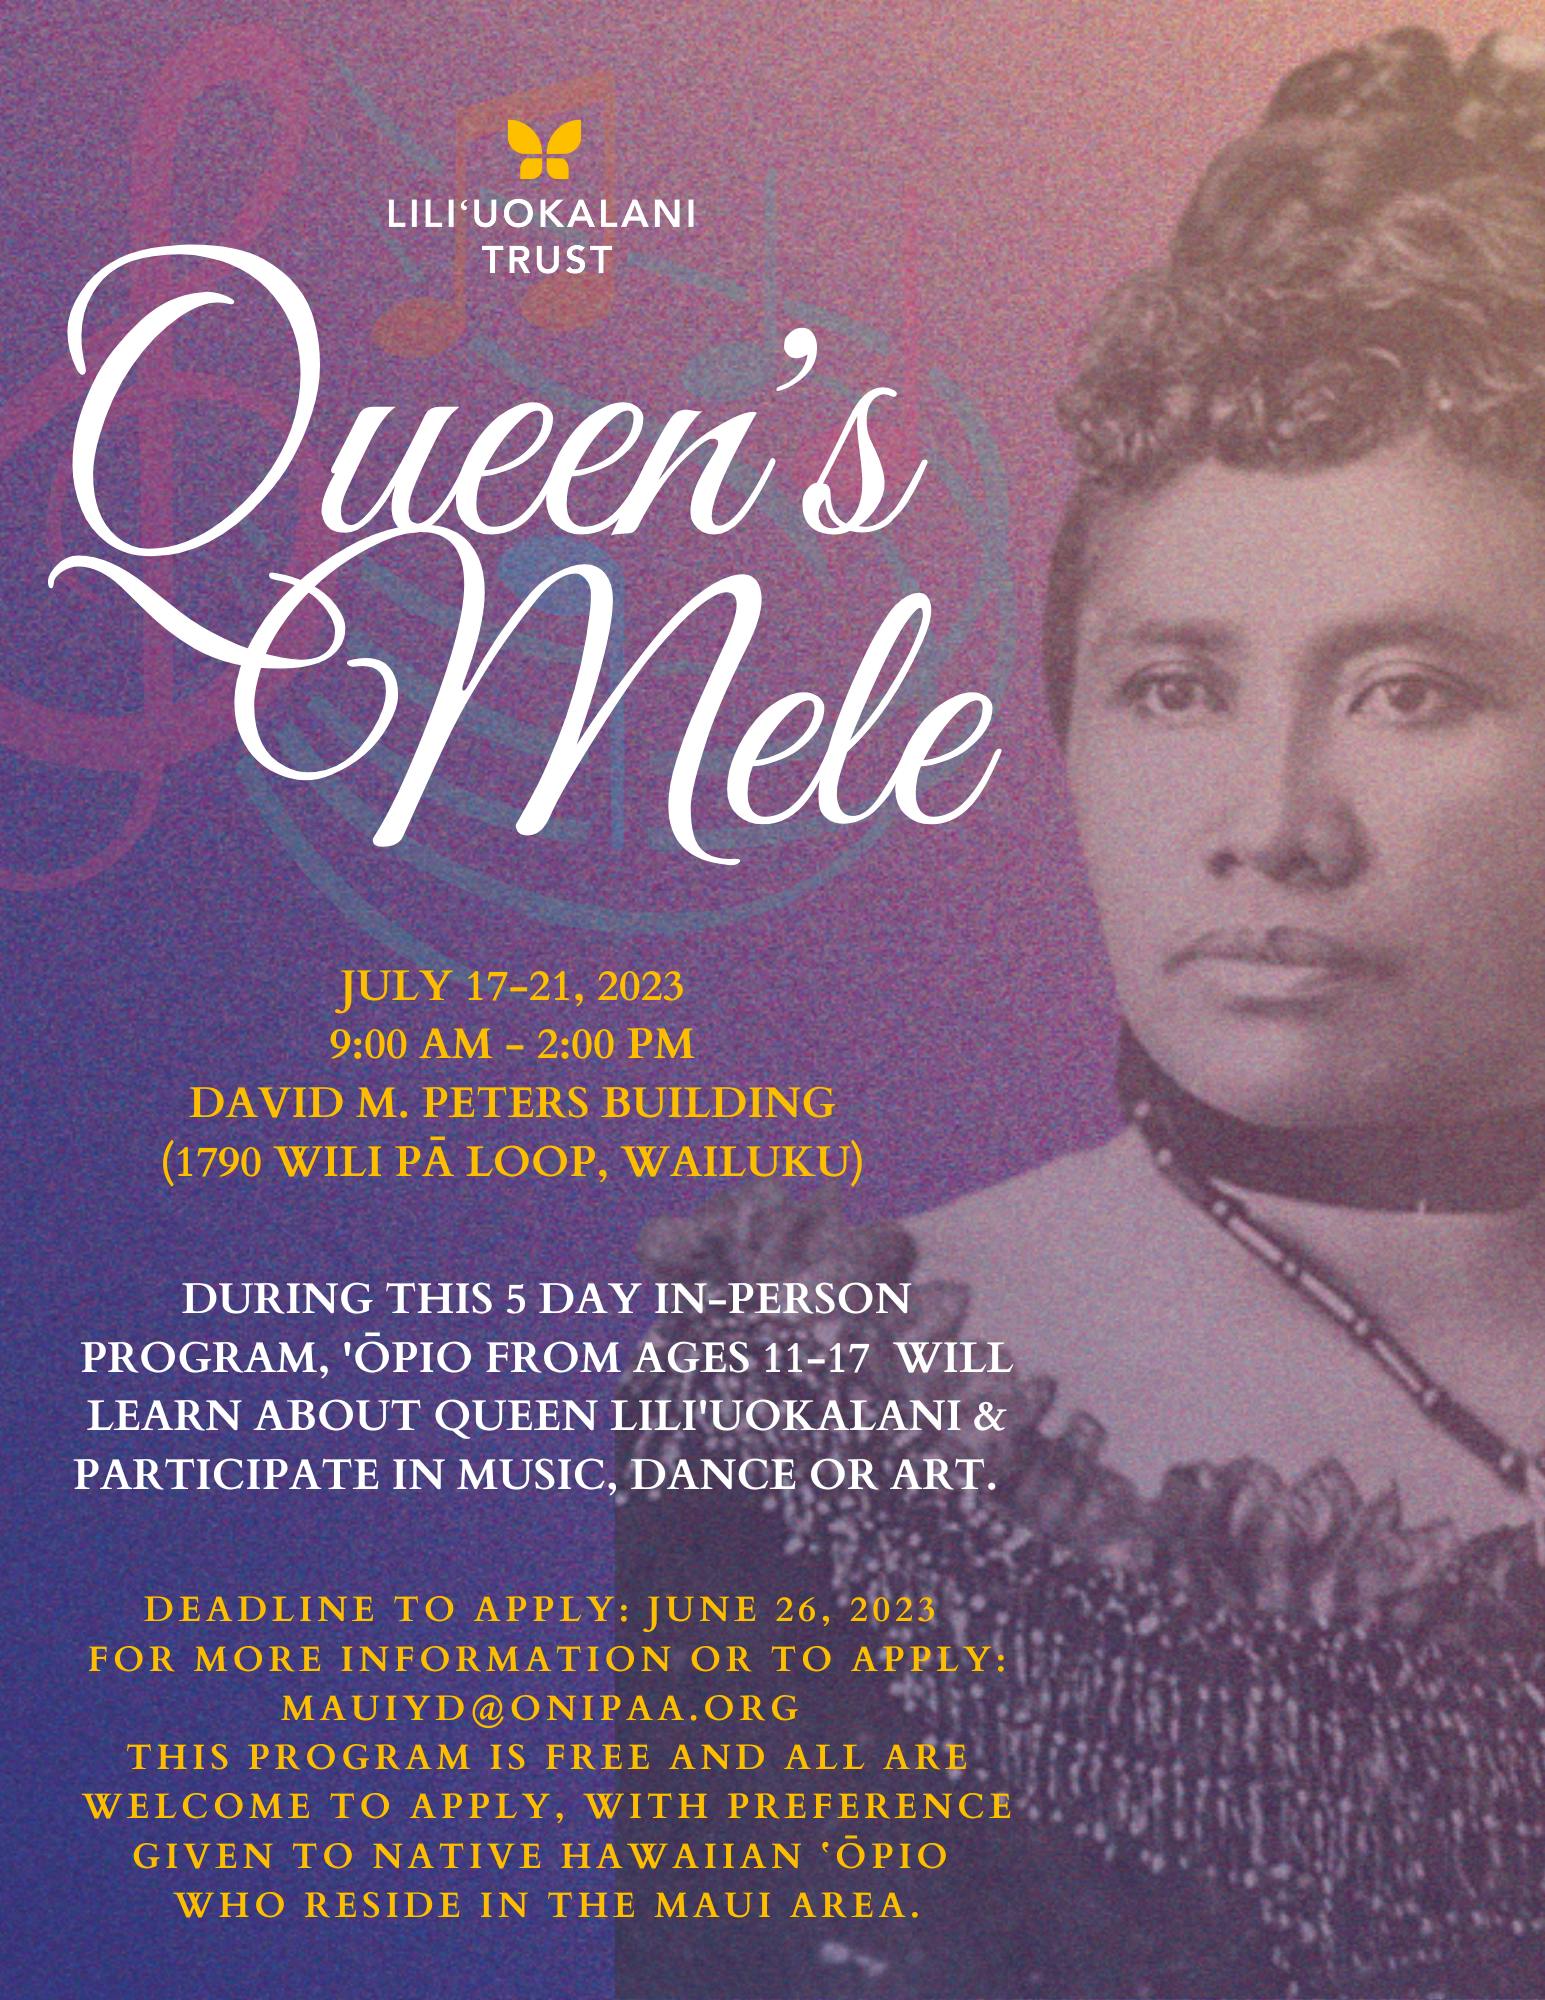 Flyer for Queenʻs Mele, a 5 day in-person program where ʻōpio from ages 11-17 will learn about Queen Liliʻuokalani and participate in music, dance or art.